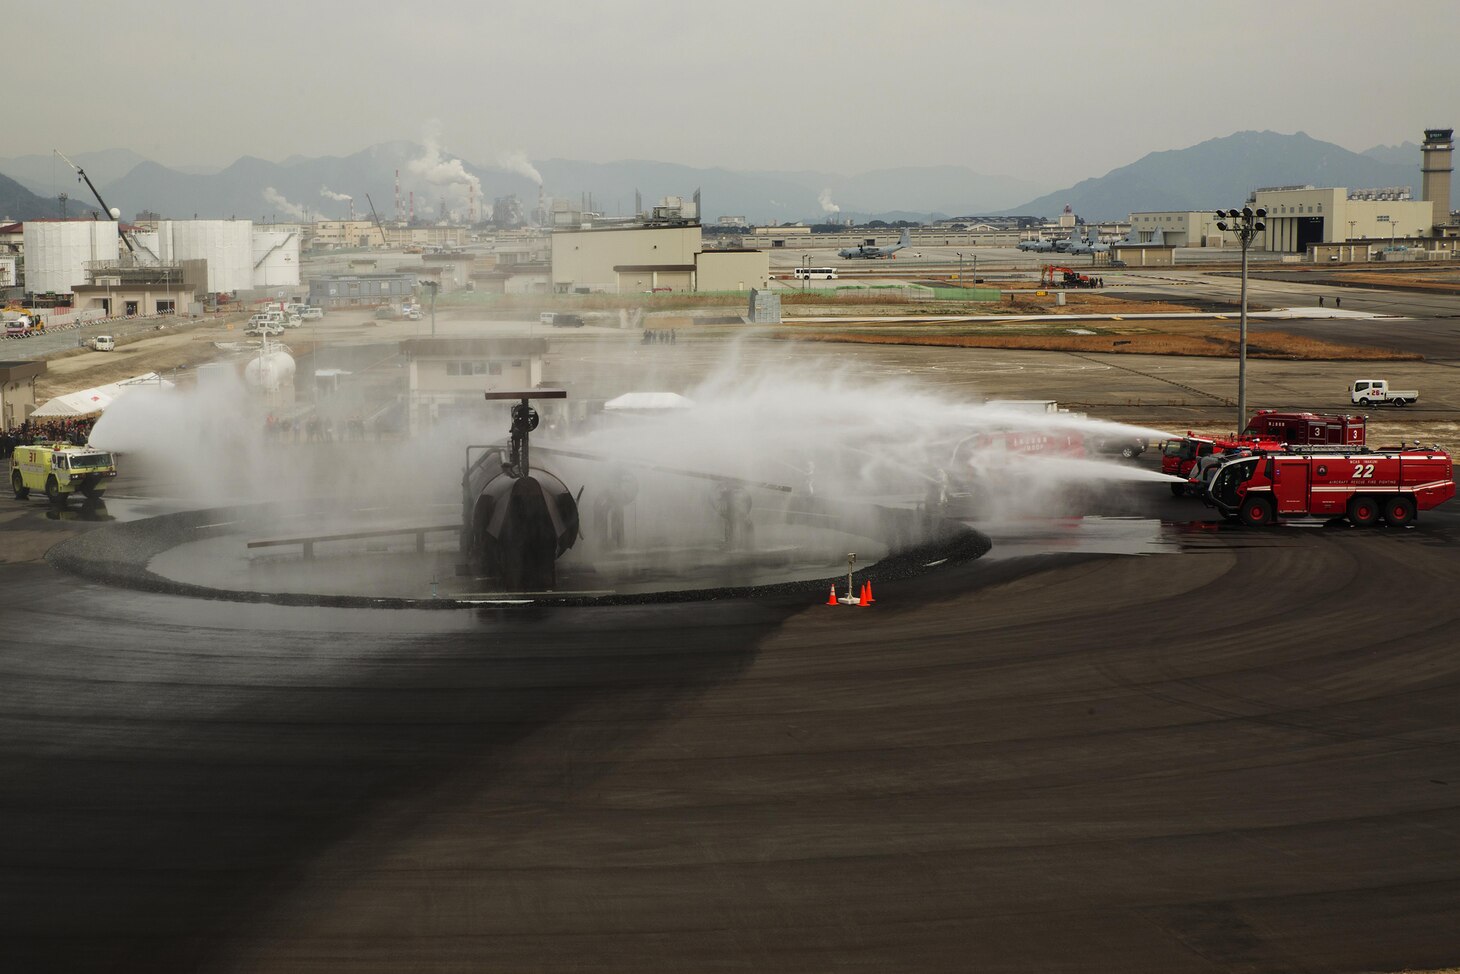 U.S. Marines, Sailors and Japanese Maritime Self-Defense Force personnel conducted a mass casualty exercise on Marine Corps Air Station Iwakuni, Japan, March 1, 2017. The exercise assessed the air station’s initial response, incident management, activation of emergency operations center and mass casualty plan in the event of a downed aircraft.